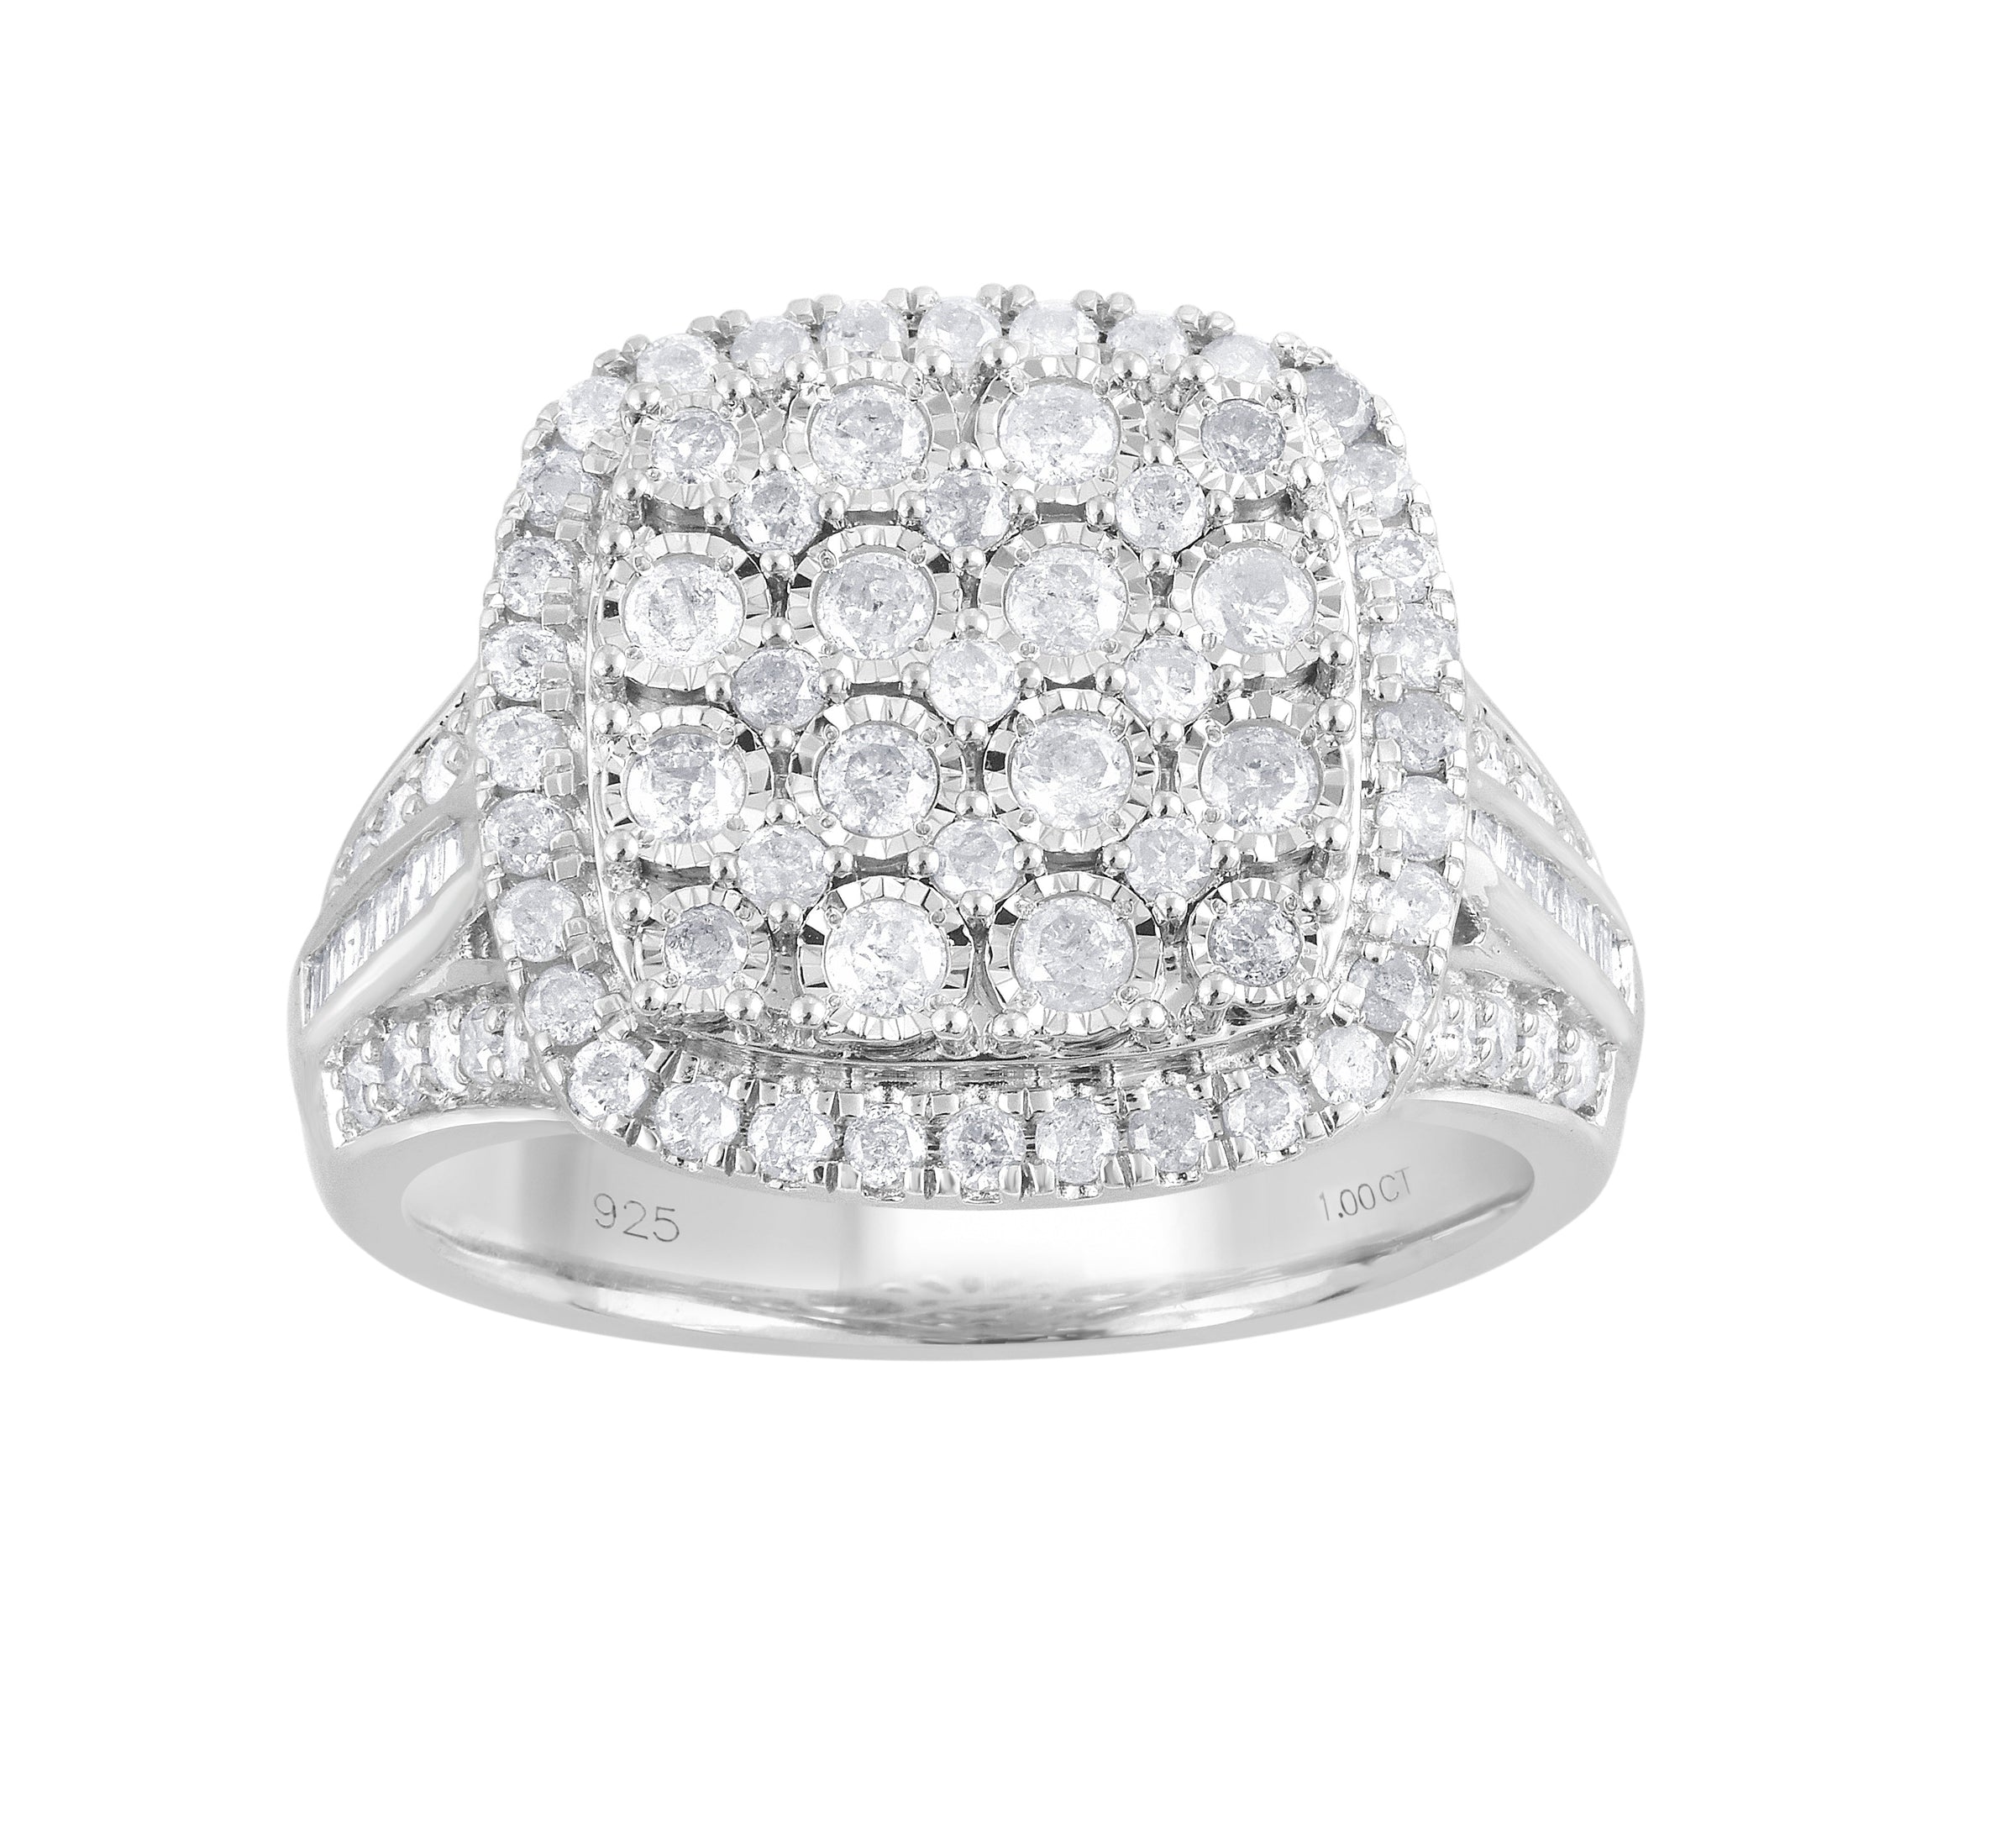 Halo Miracle Ring with 1.00ct of Diamonds in Sterling Silver Rings Bevilles 